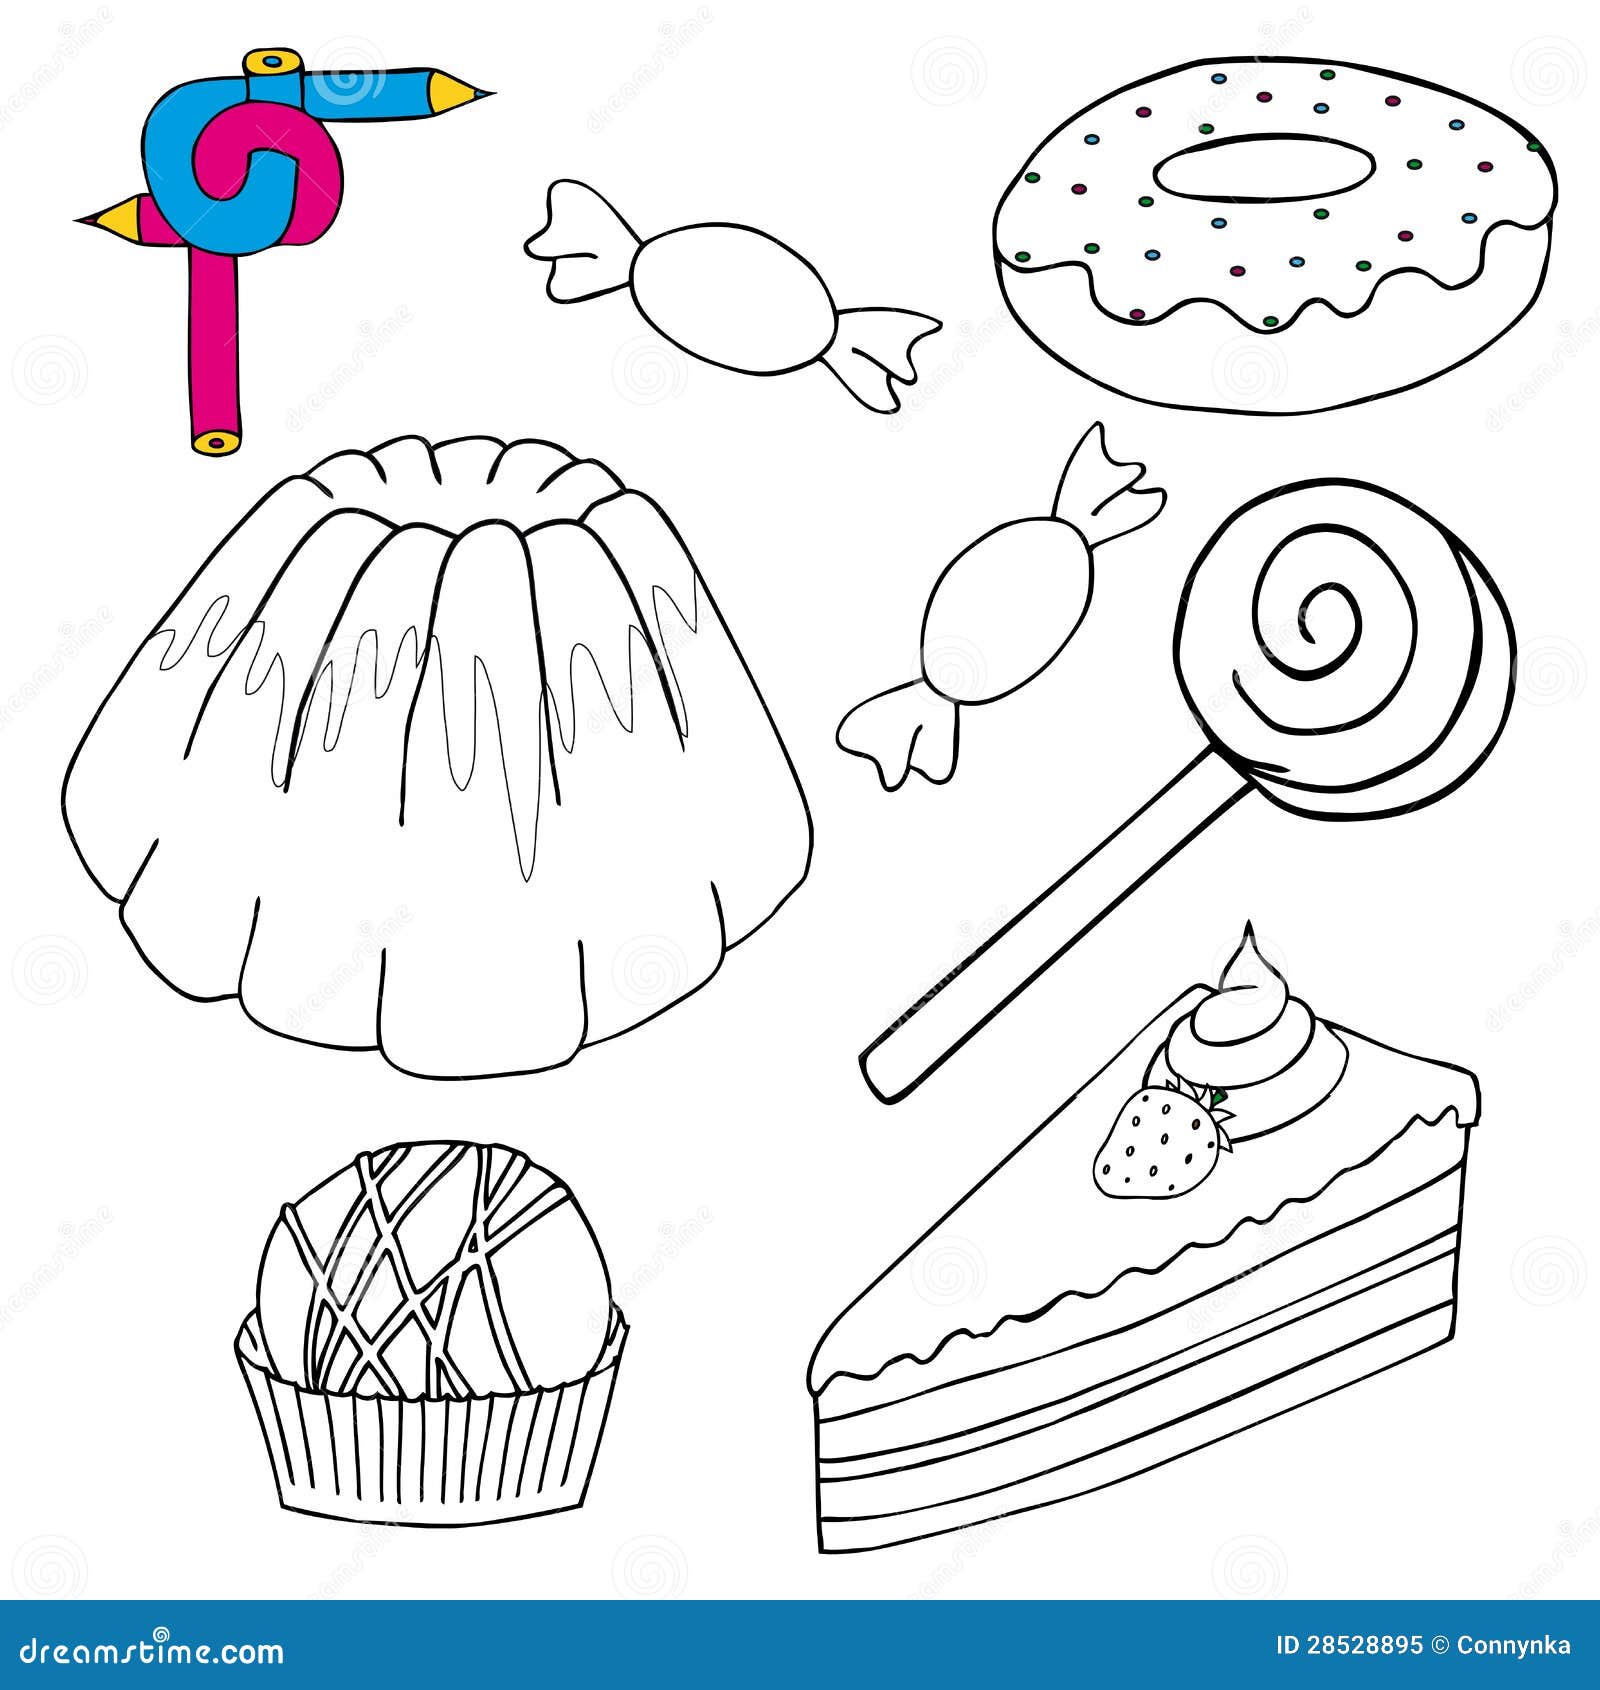 cake coloring pages with congratulations - photo #6